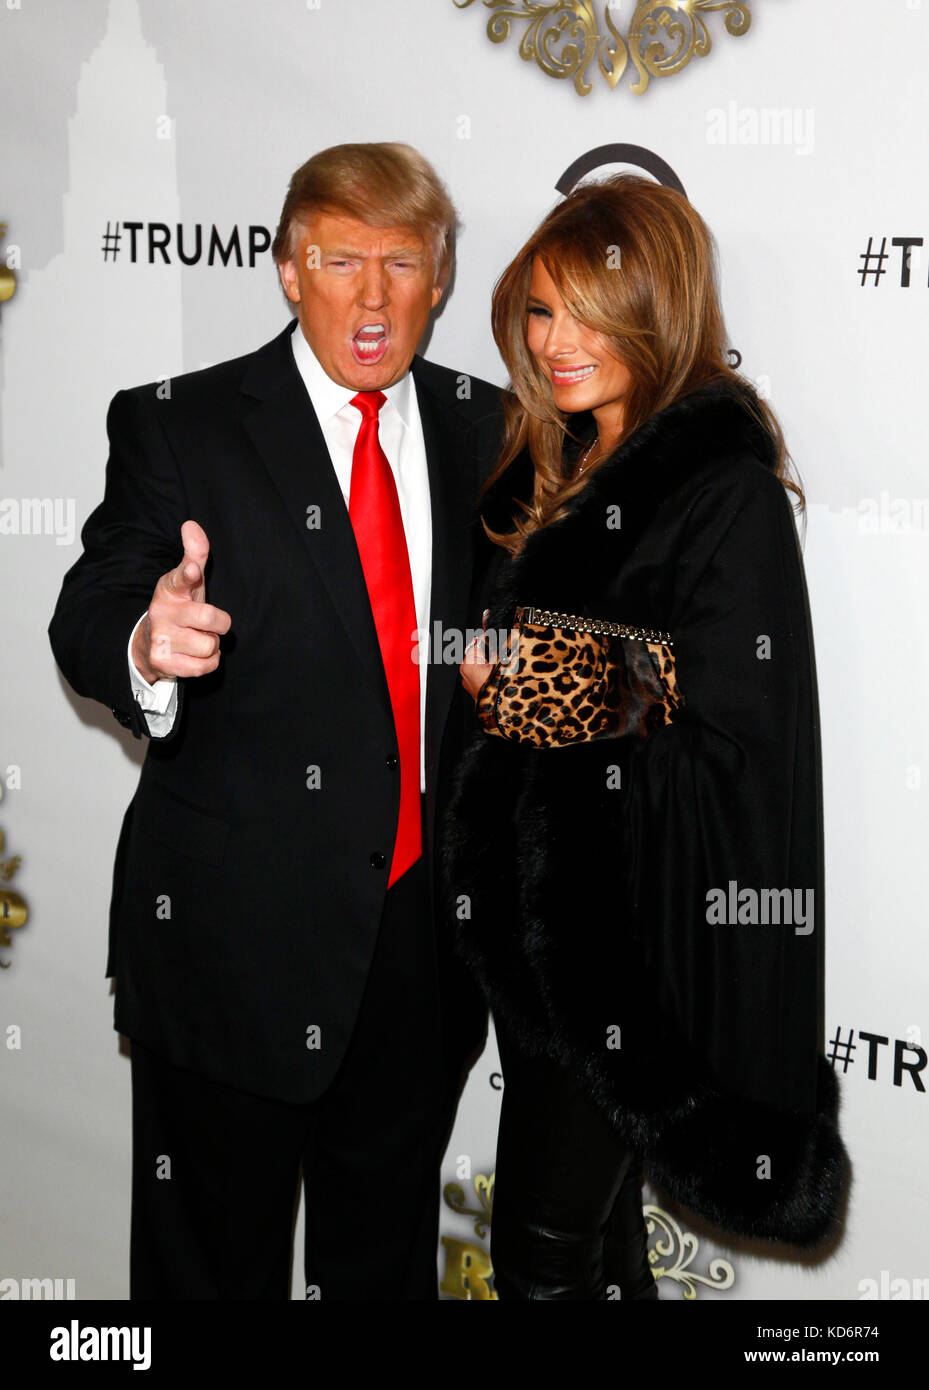 Donald Trump & Melania Trump pictured at the "Comedy Central Roast of  Donald Trump" at the